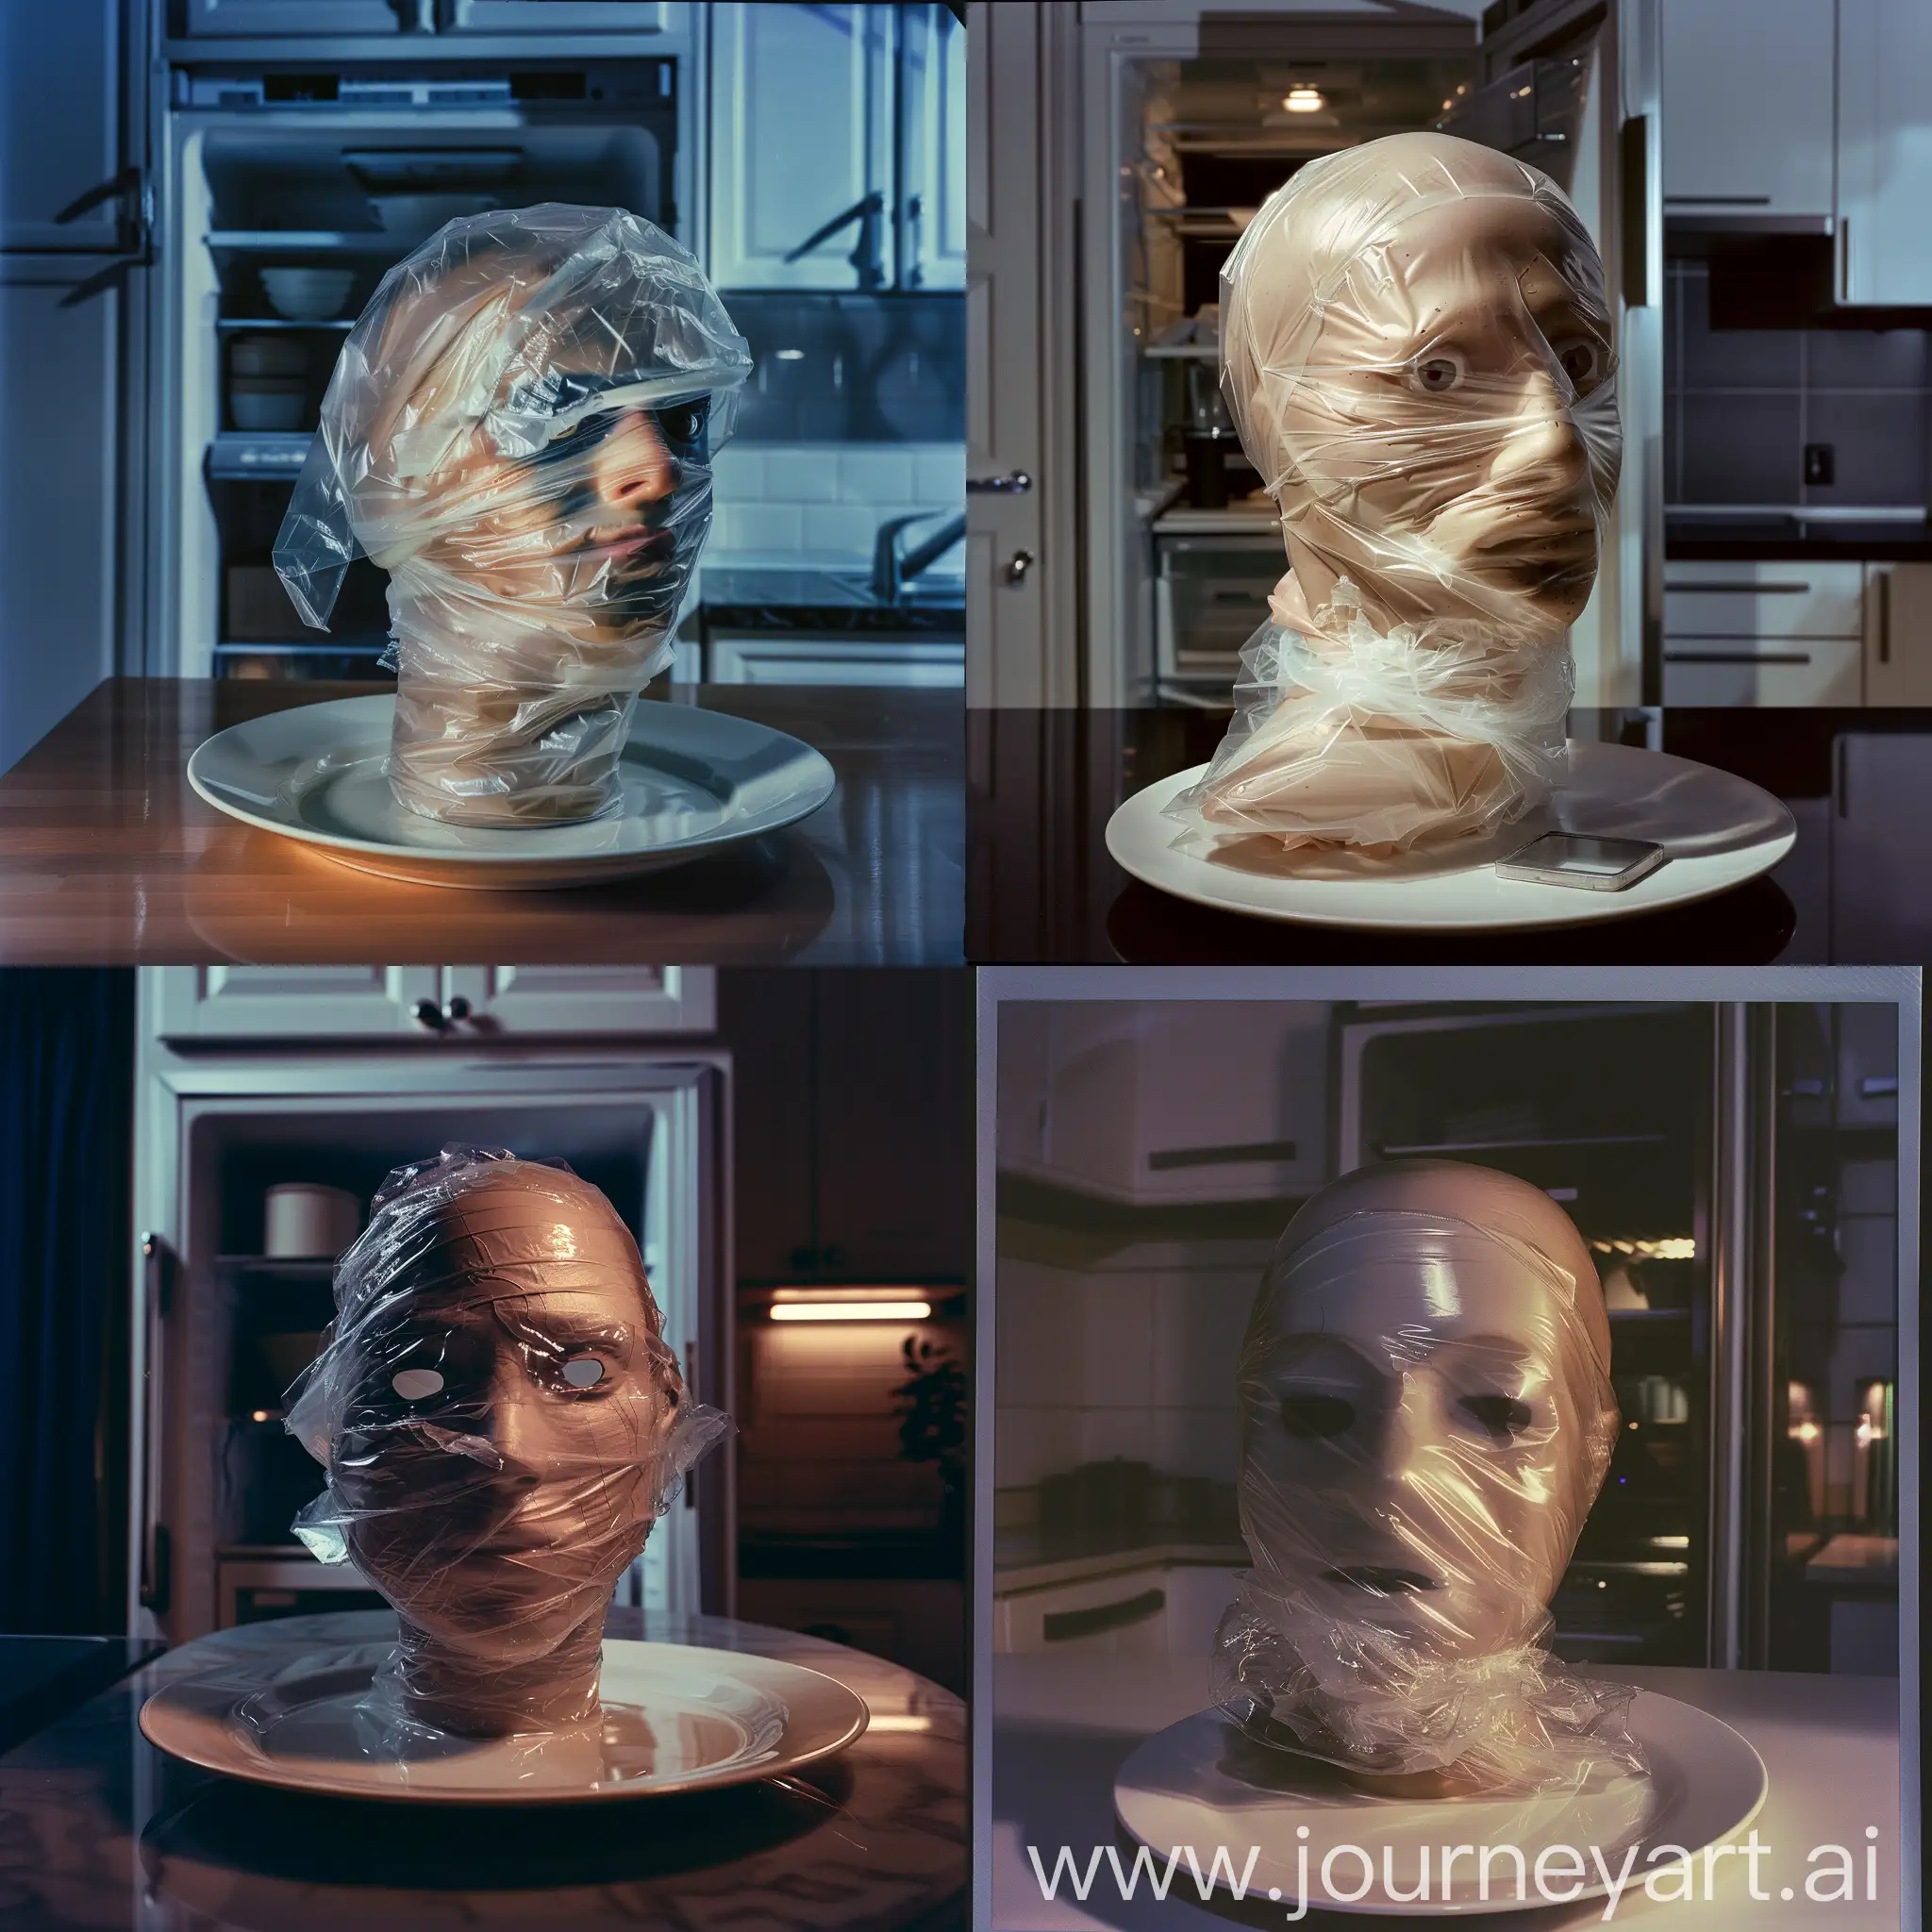 old polaroid photo style, evidence photo style, A handsome male detached prototype head wrapped with plastic film on a plate, with blank eyes rolled back, good looking young male head wrapped with transparent plastic film, only the head, face wrapped in plastic film, prototype head inside a fridge, kitchen at night background, with lights turned off, low lighting